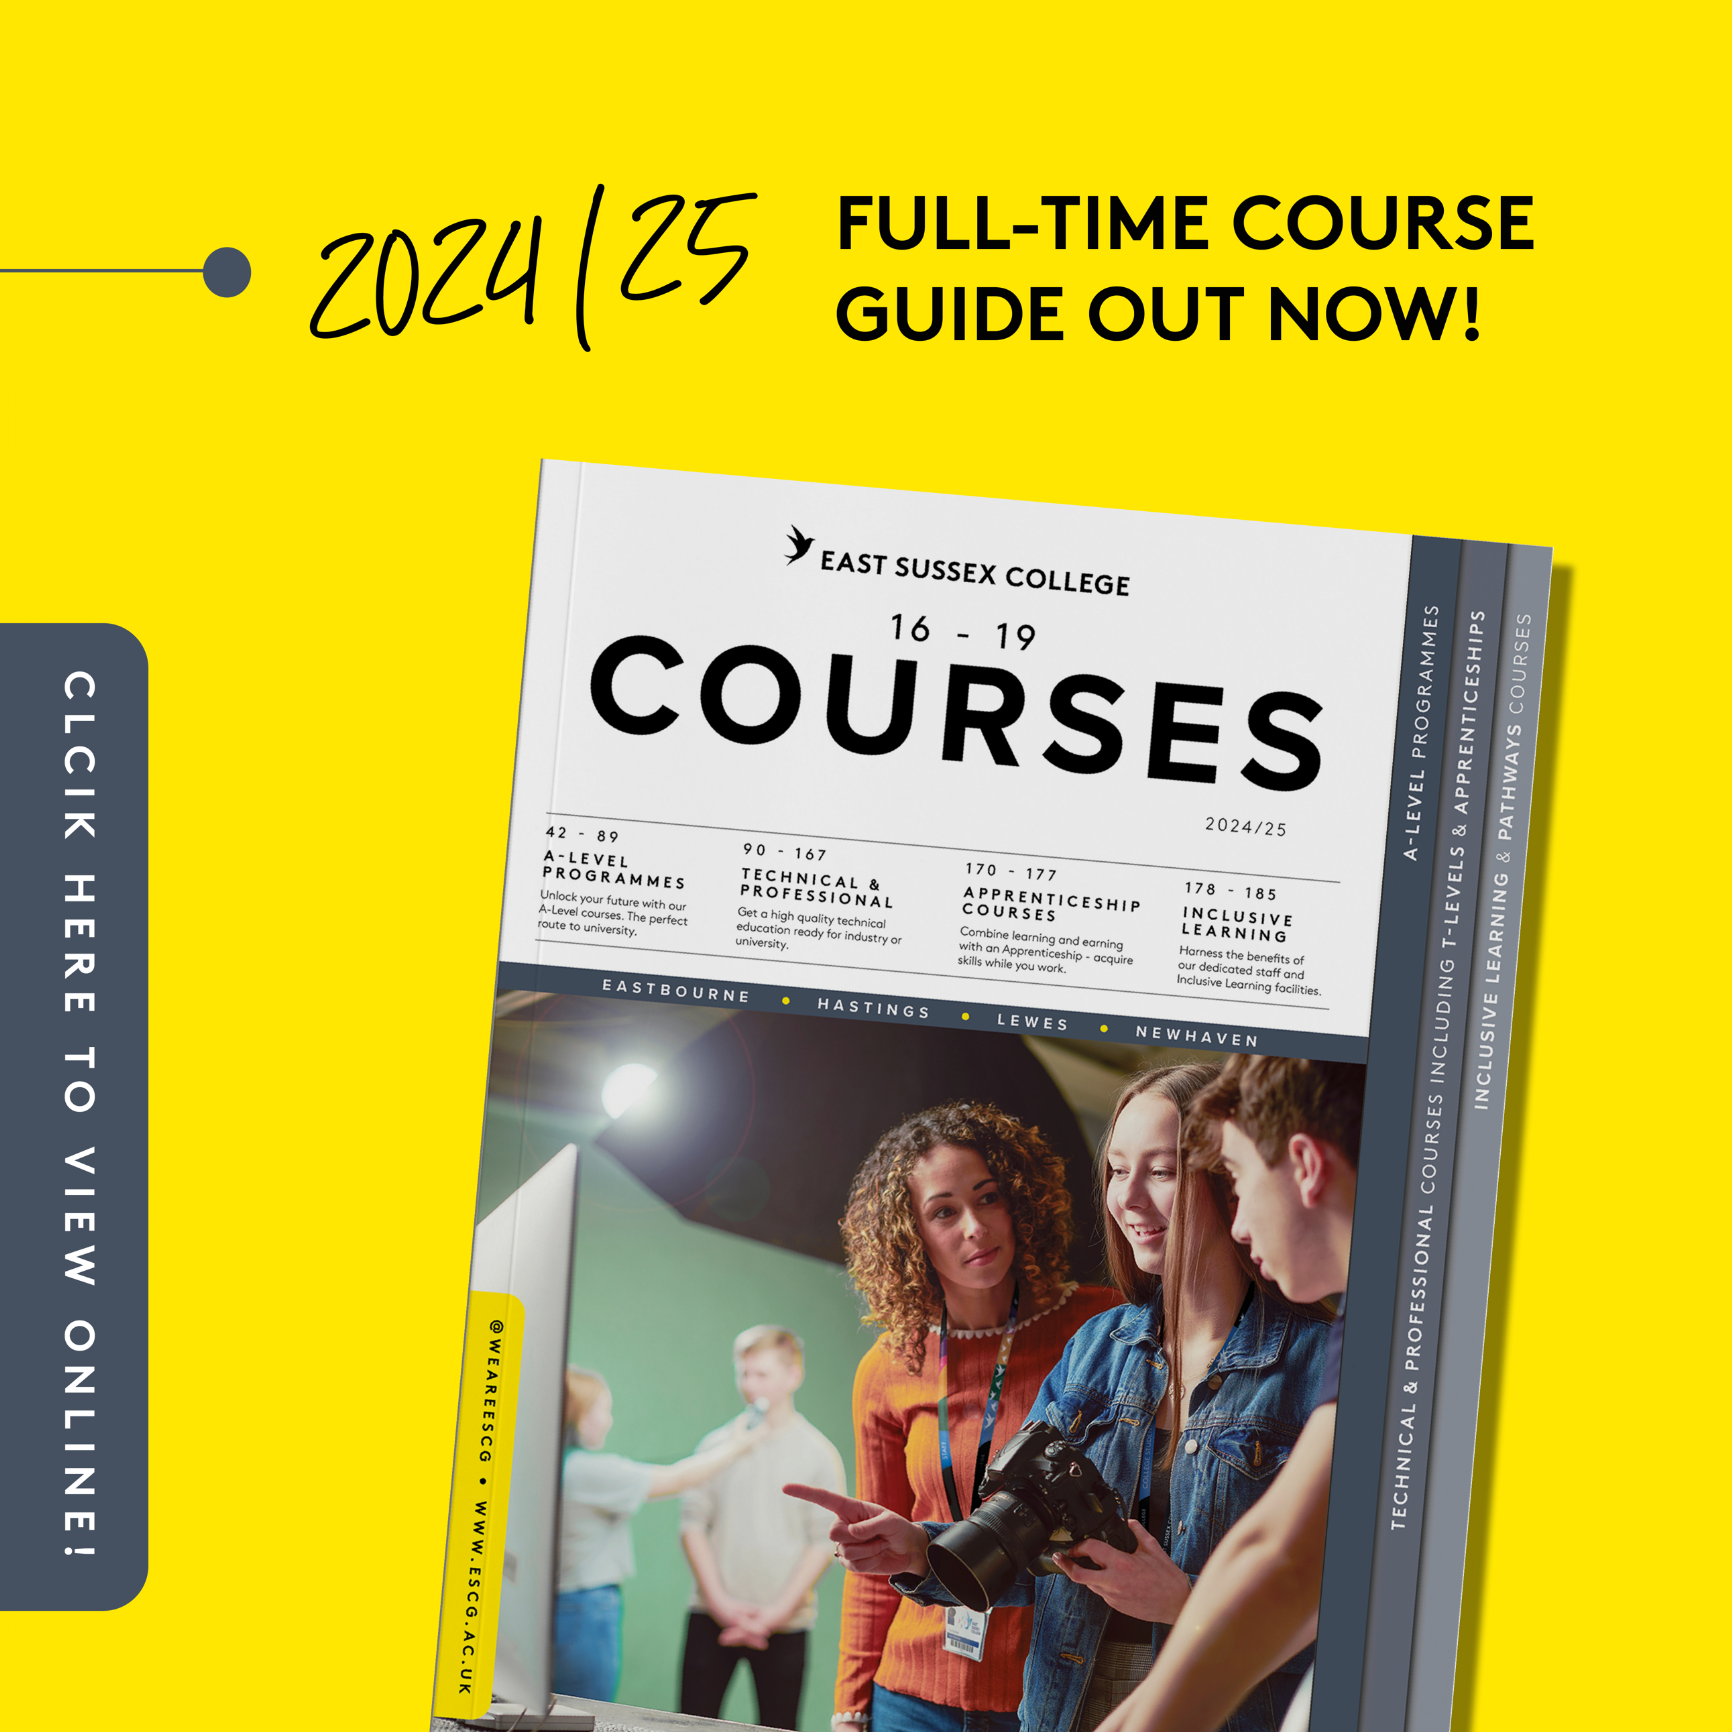 Full-time course guide link image